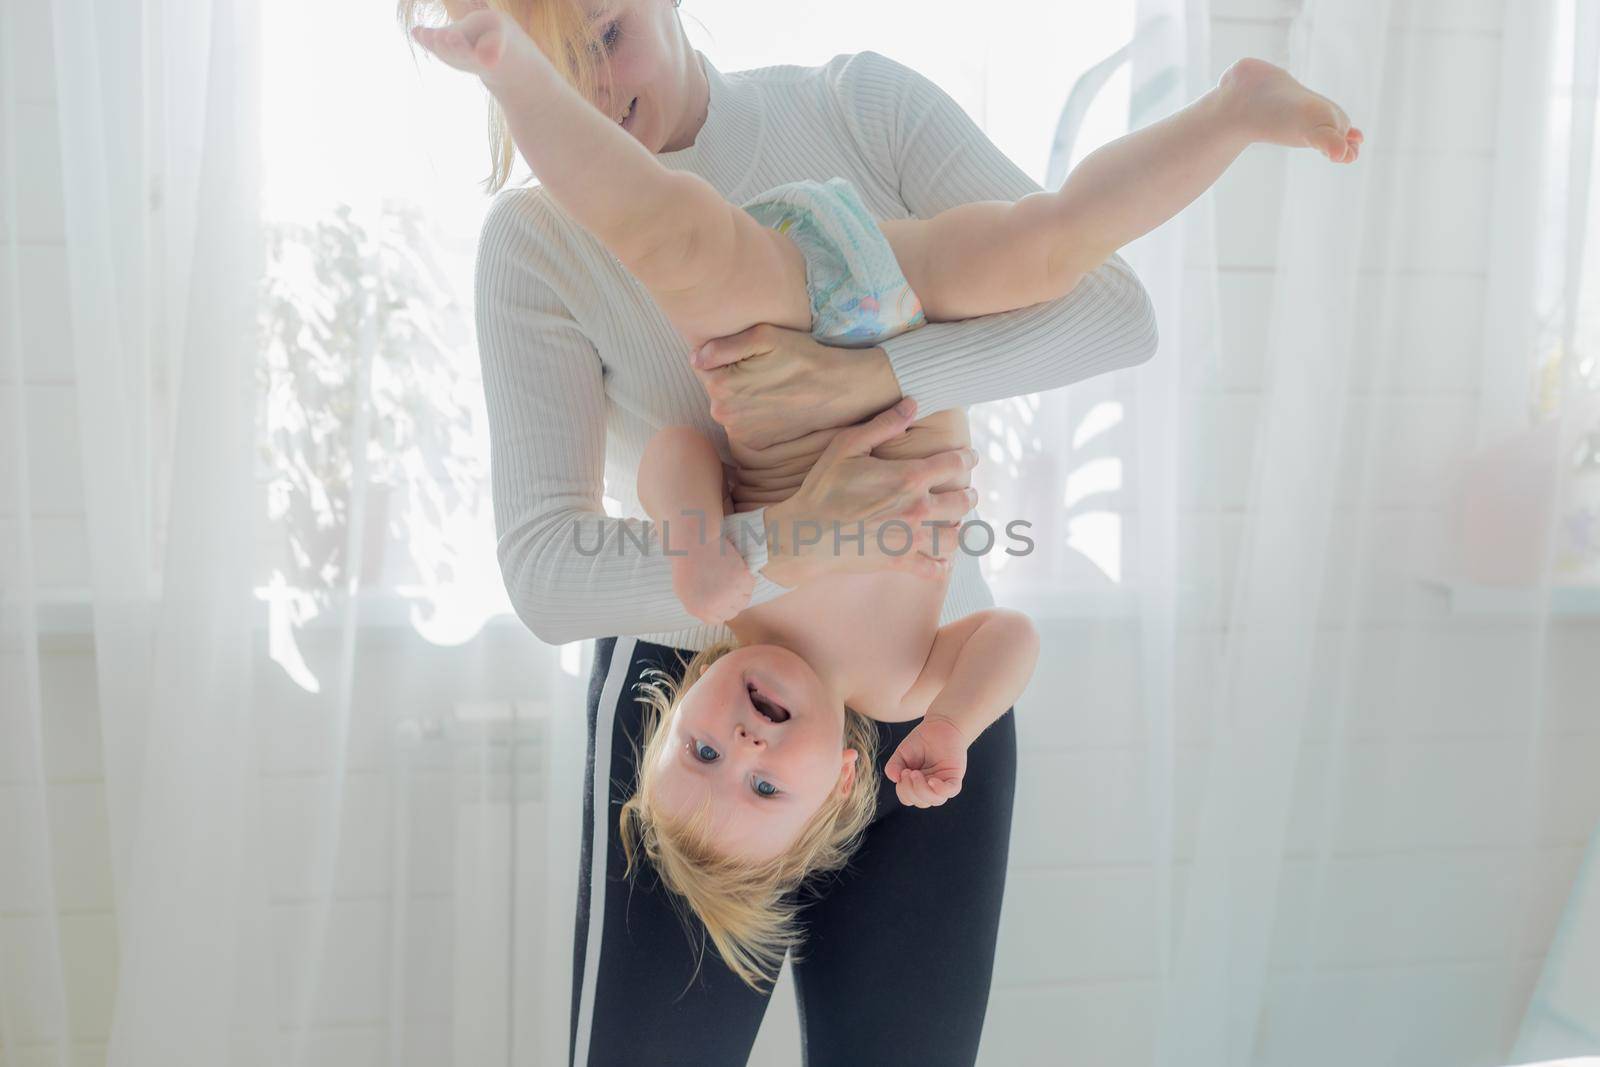 Mom holds the baby upside down, is engaged in children's gymnastics. Both are happy and laughing.